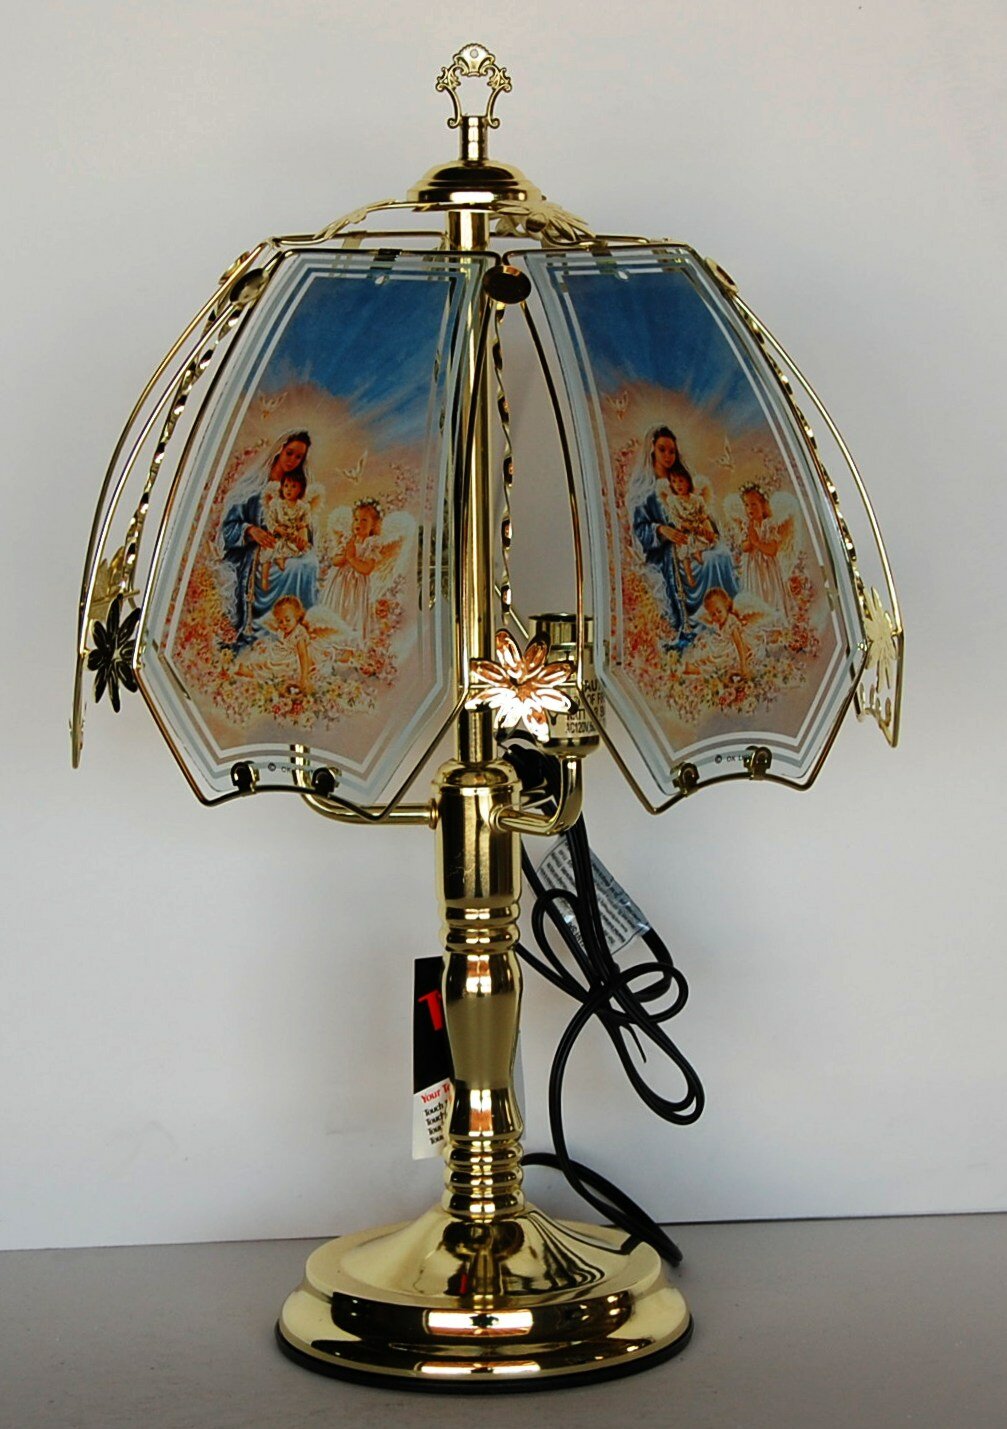 2 Black Chrome Set of Two OK Lighting OK-603C-MA1 14.25-Inch Touch Lamp with Maria & Angel Theme